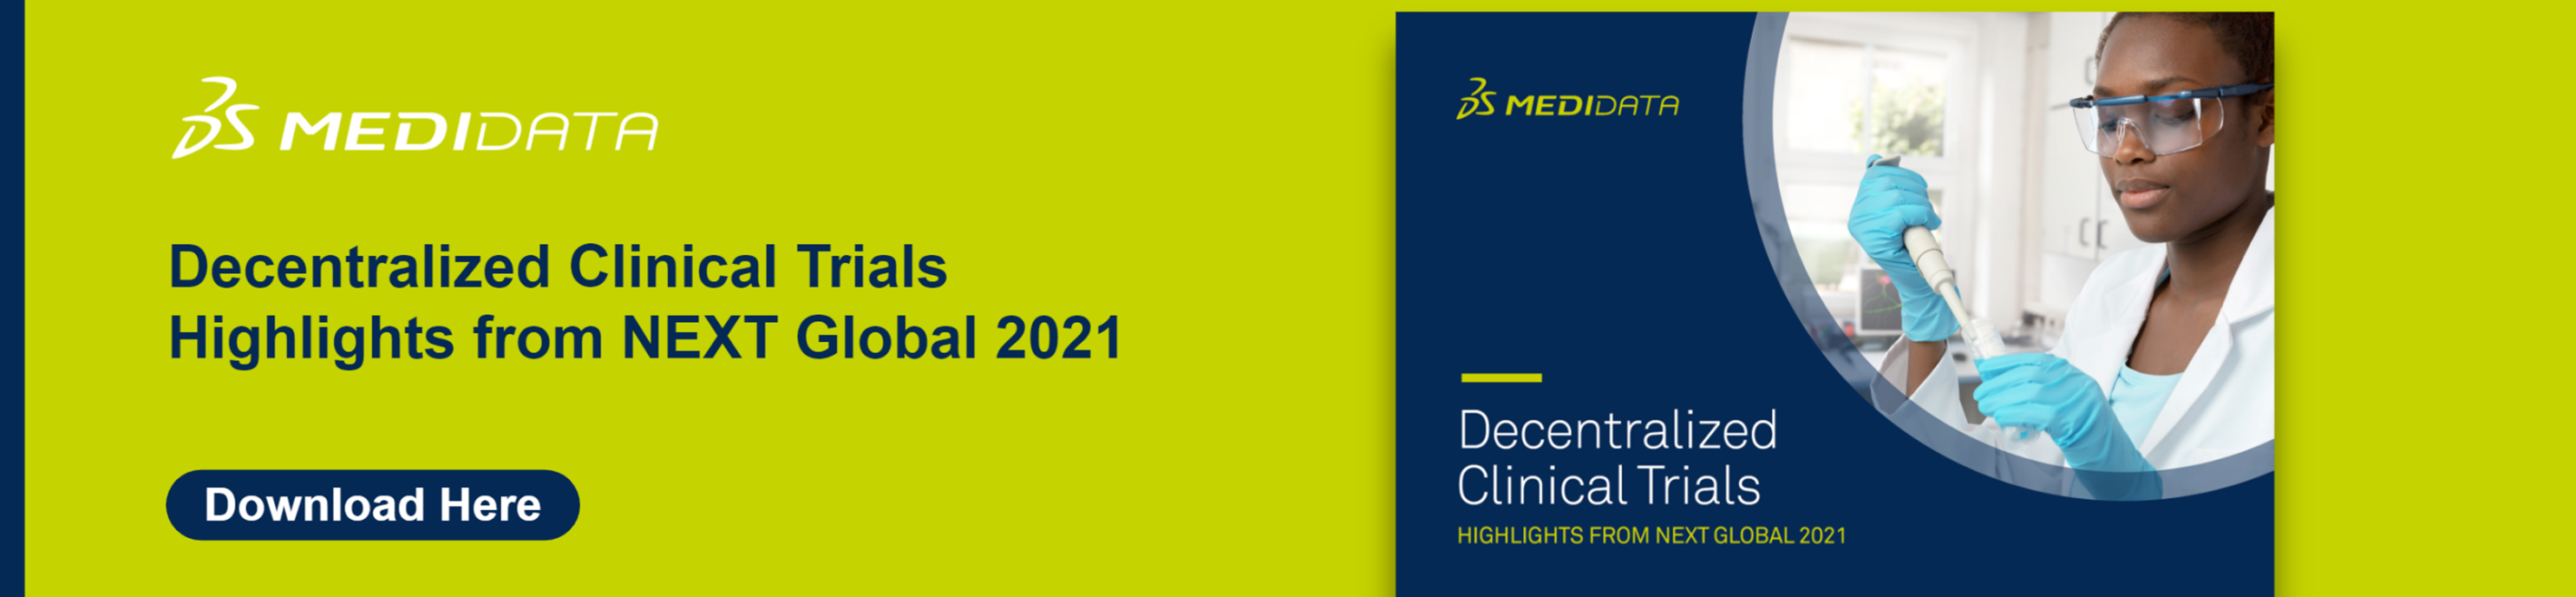 Decentralized Clinical Trials Next Global 2021